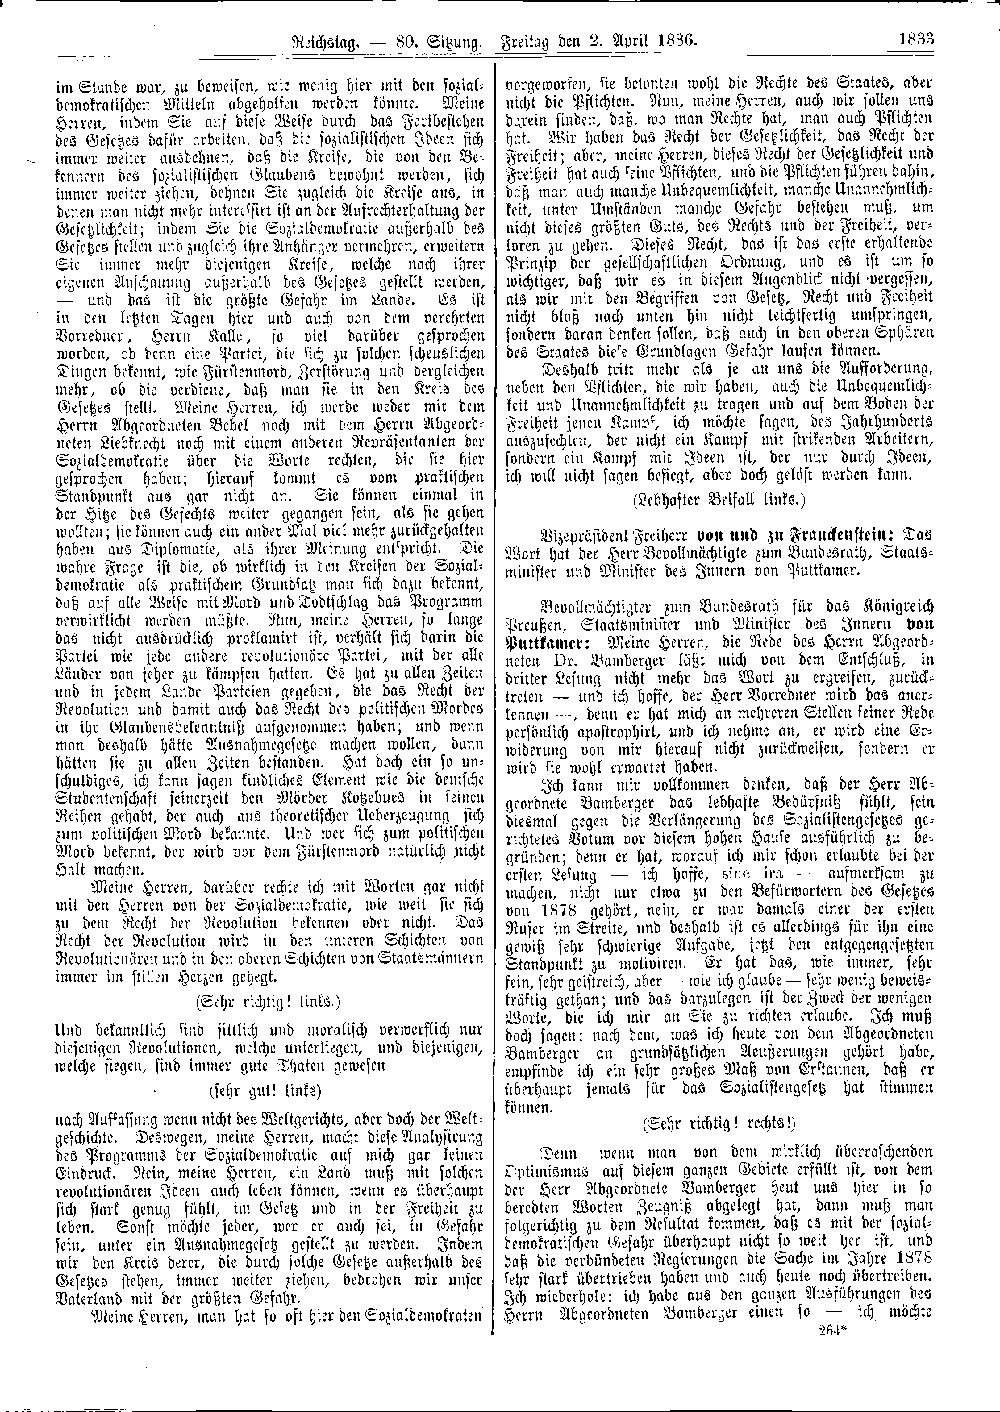 Scan of page 1833